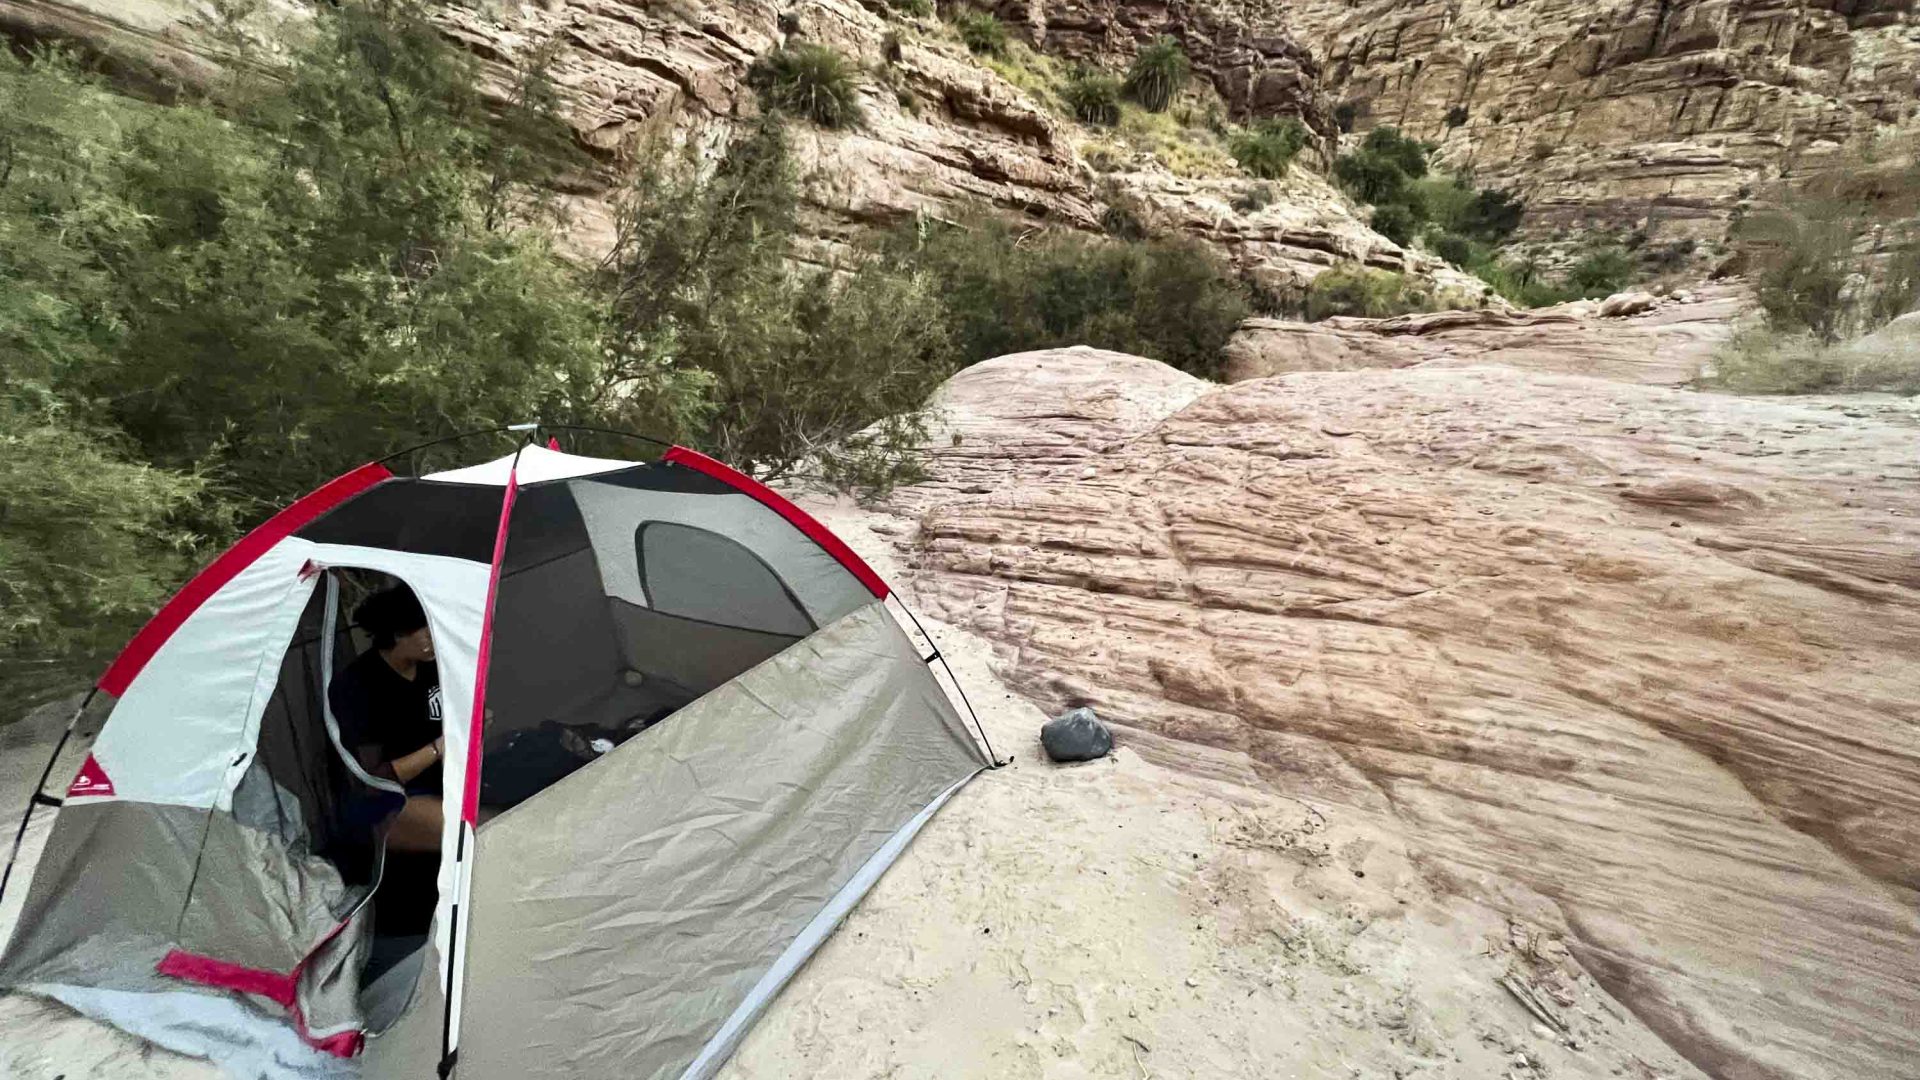 A tent pitched in the canyon.